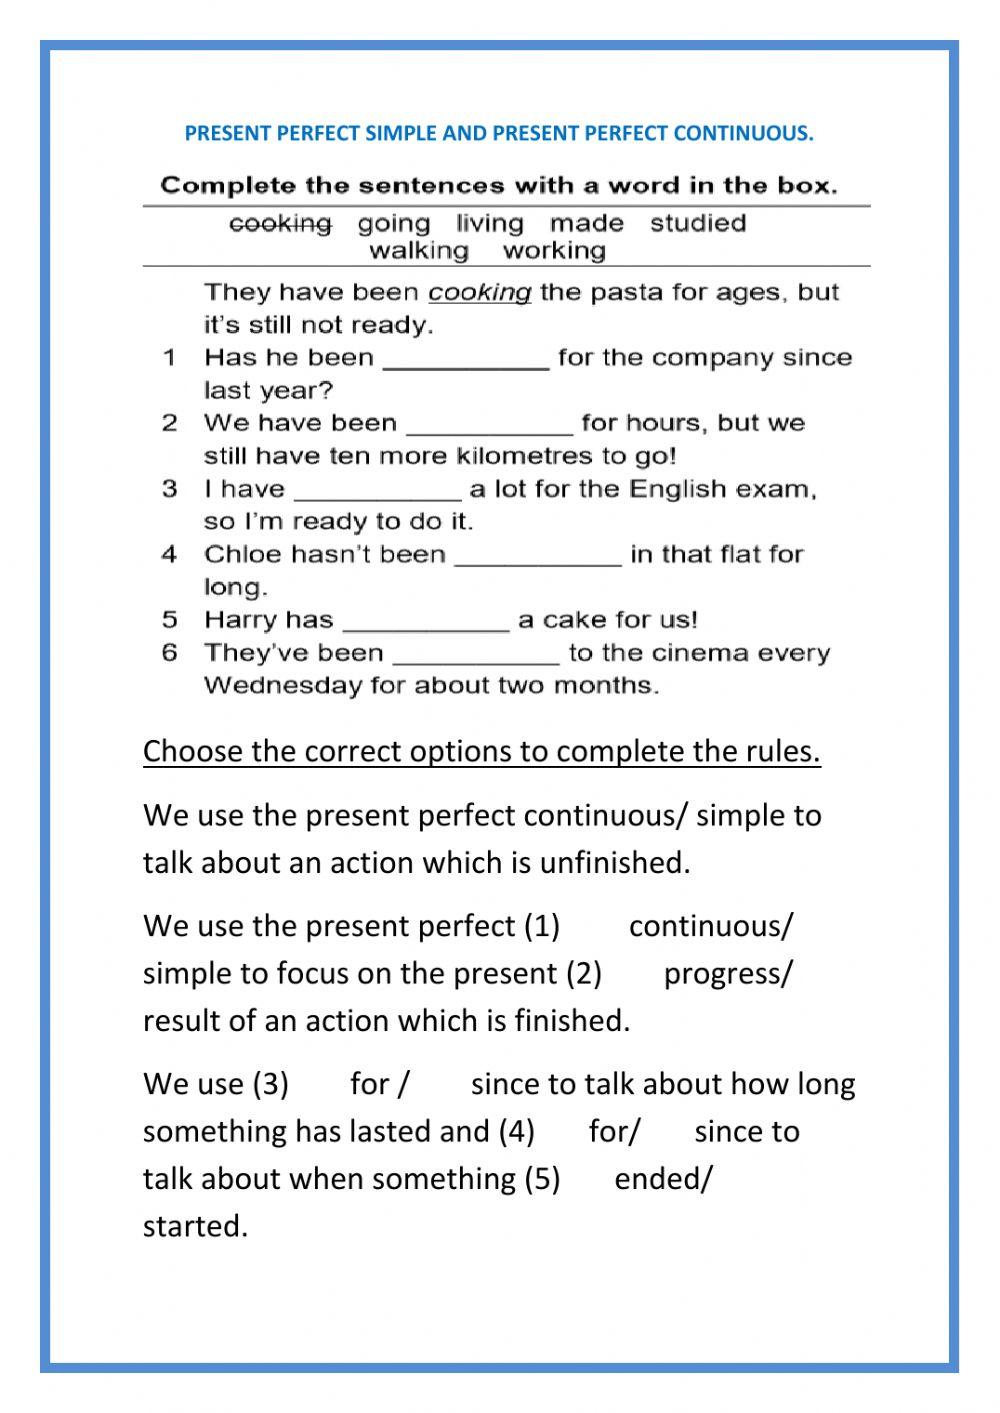 Past simple and past continuous. Present perfect simple and present perfect continuous.